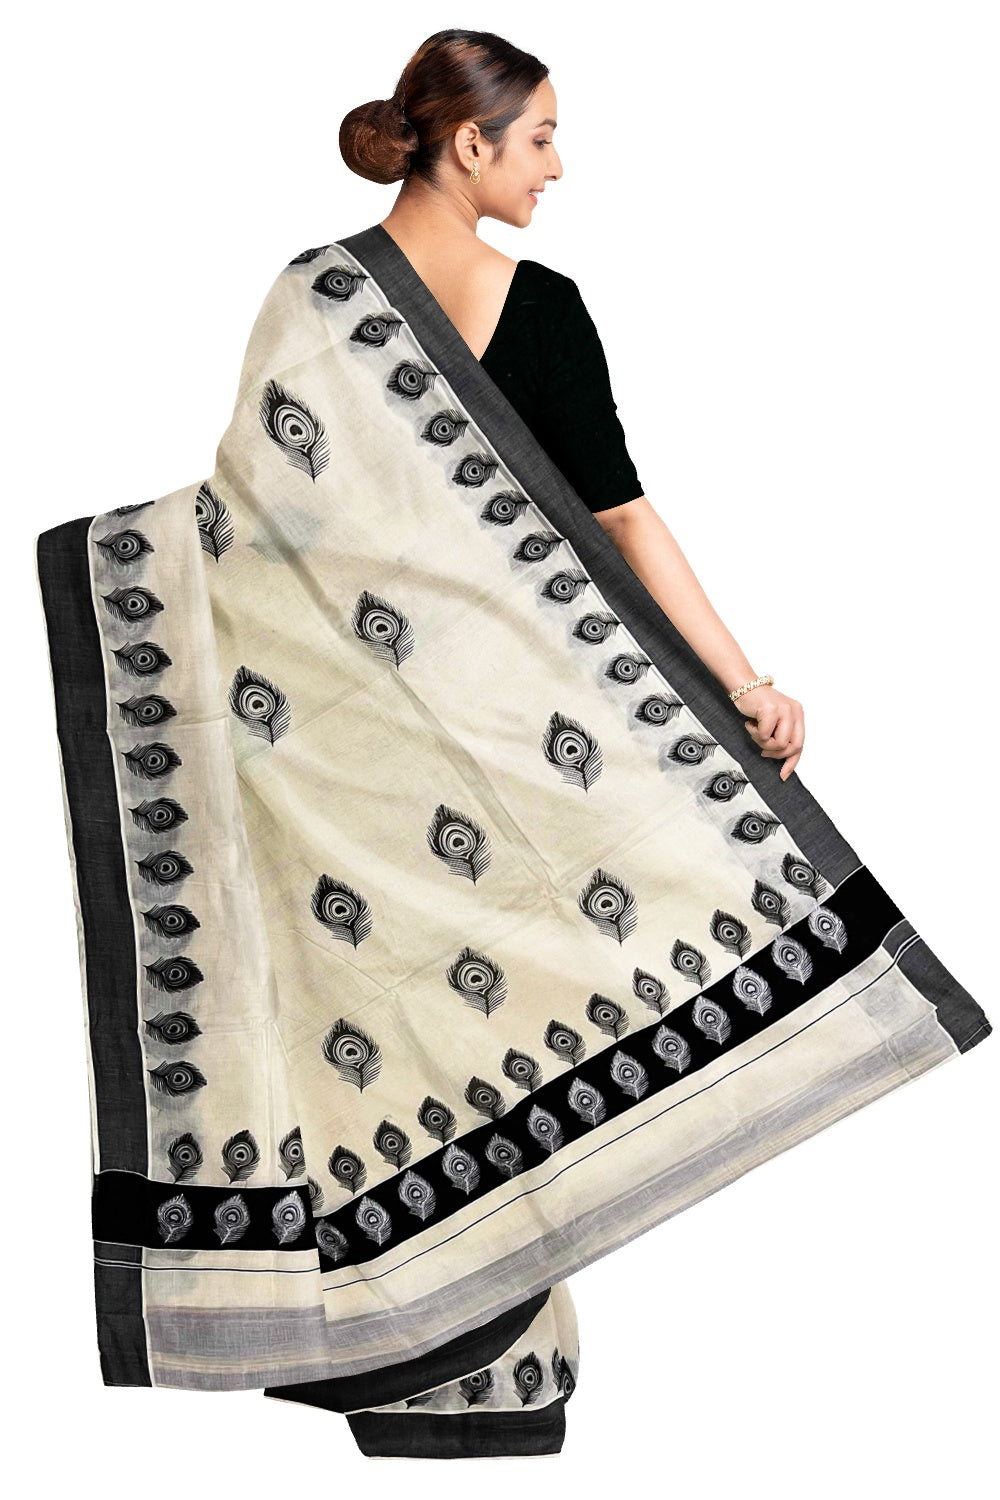 Off White Pure Cotton Kerala Saree with Peacock Feather Block Prints on Black Border and Tassels on Pallu